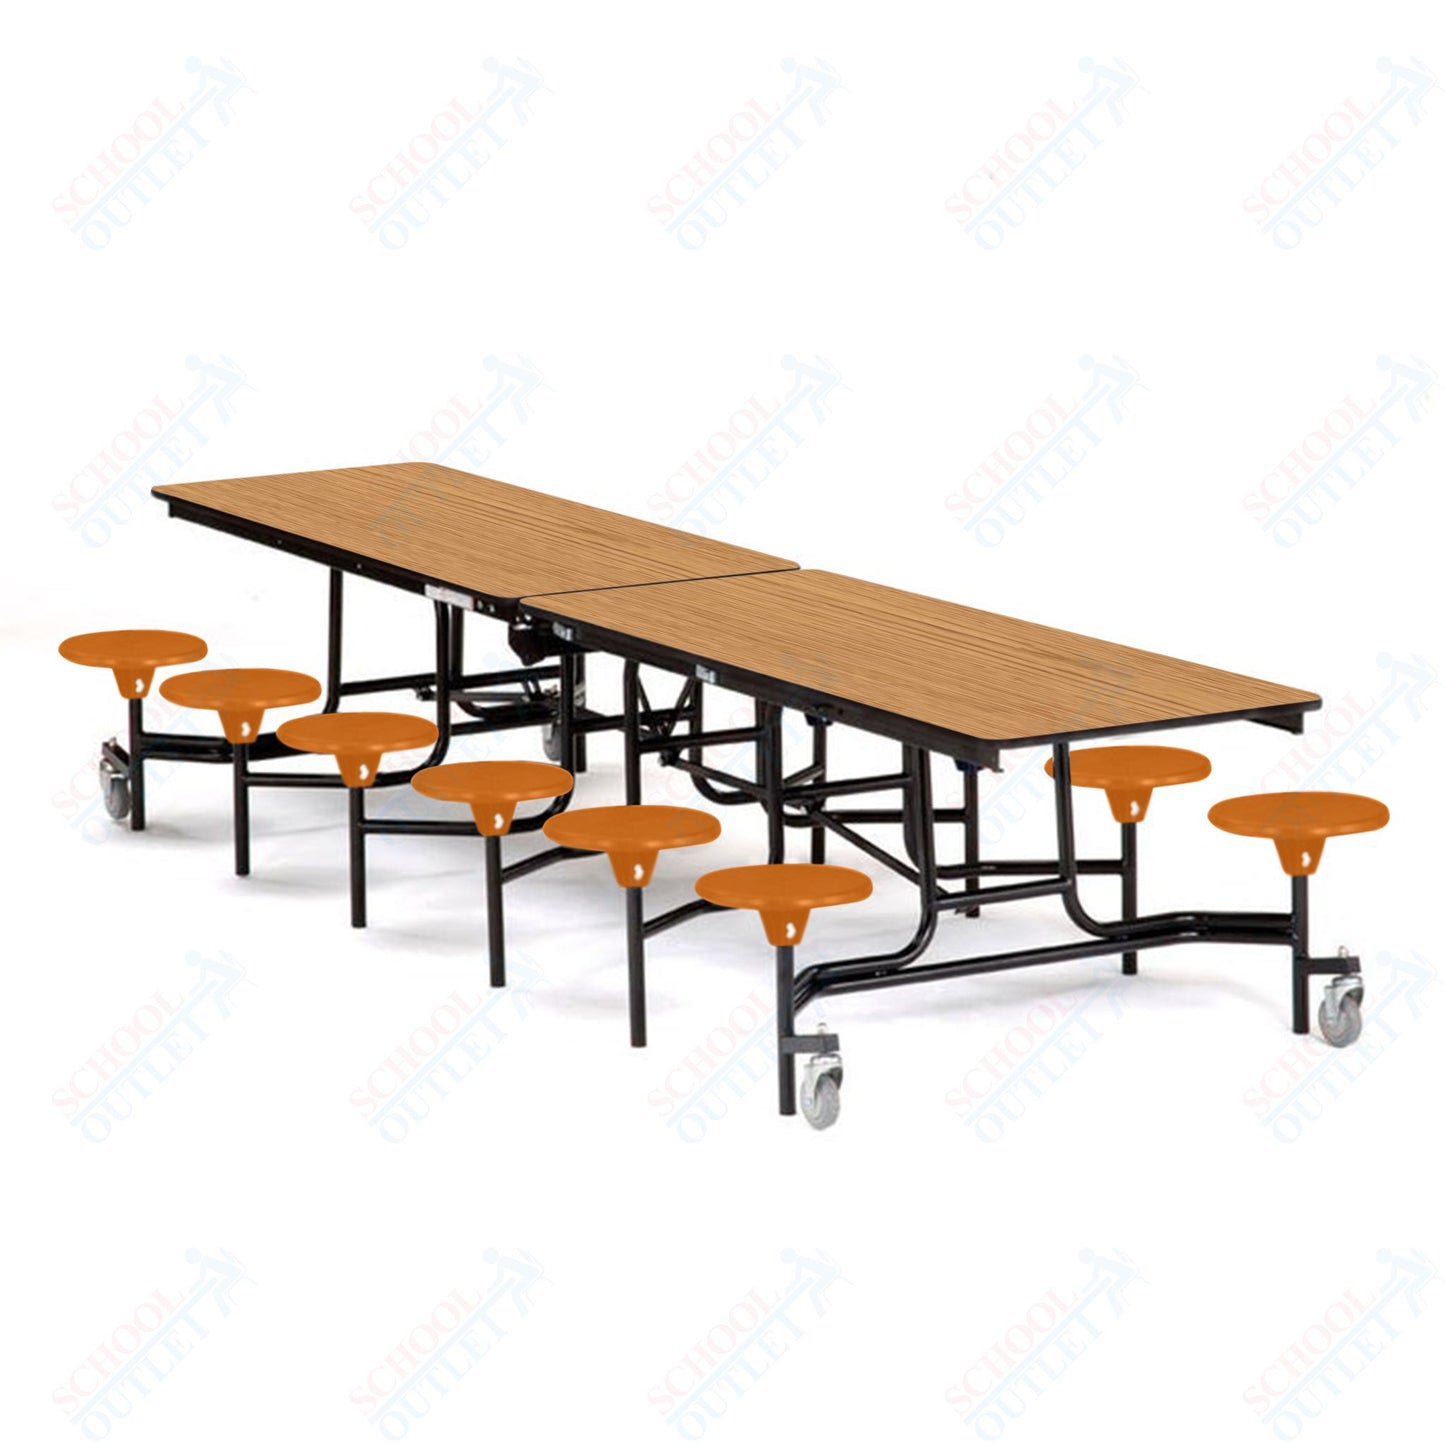 Mobile Cafeteria Lunchroom Stool Table - 30" W x 12' L - 12 Stools - Plywood Core - T-Molding Edge -  Black Powdercoated Frame